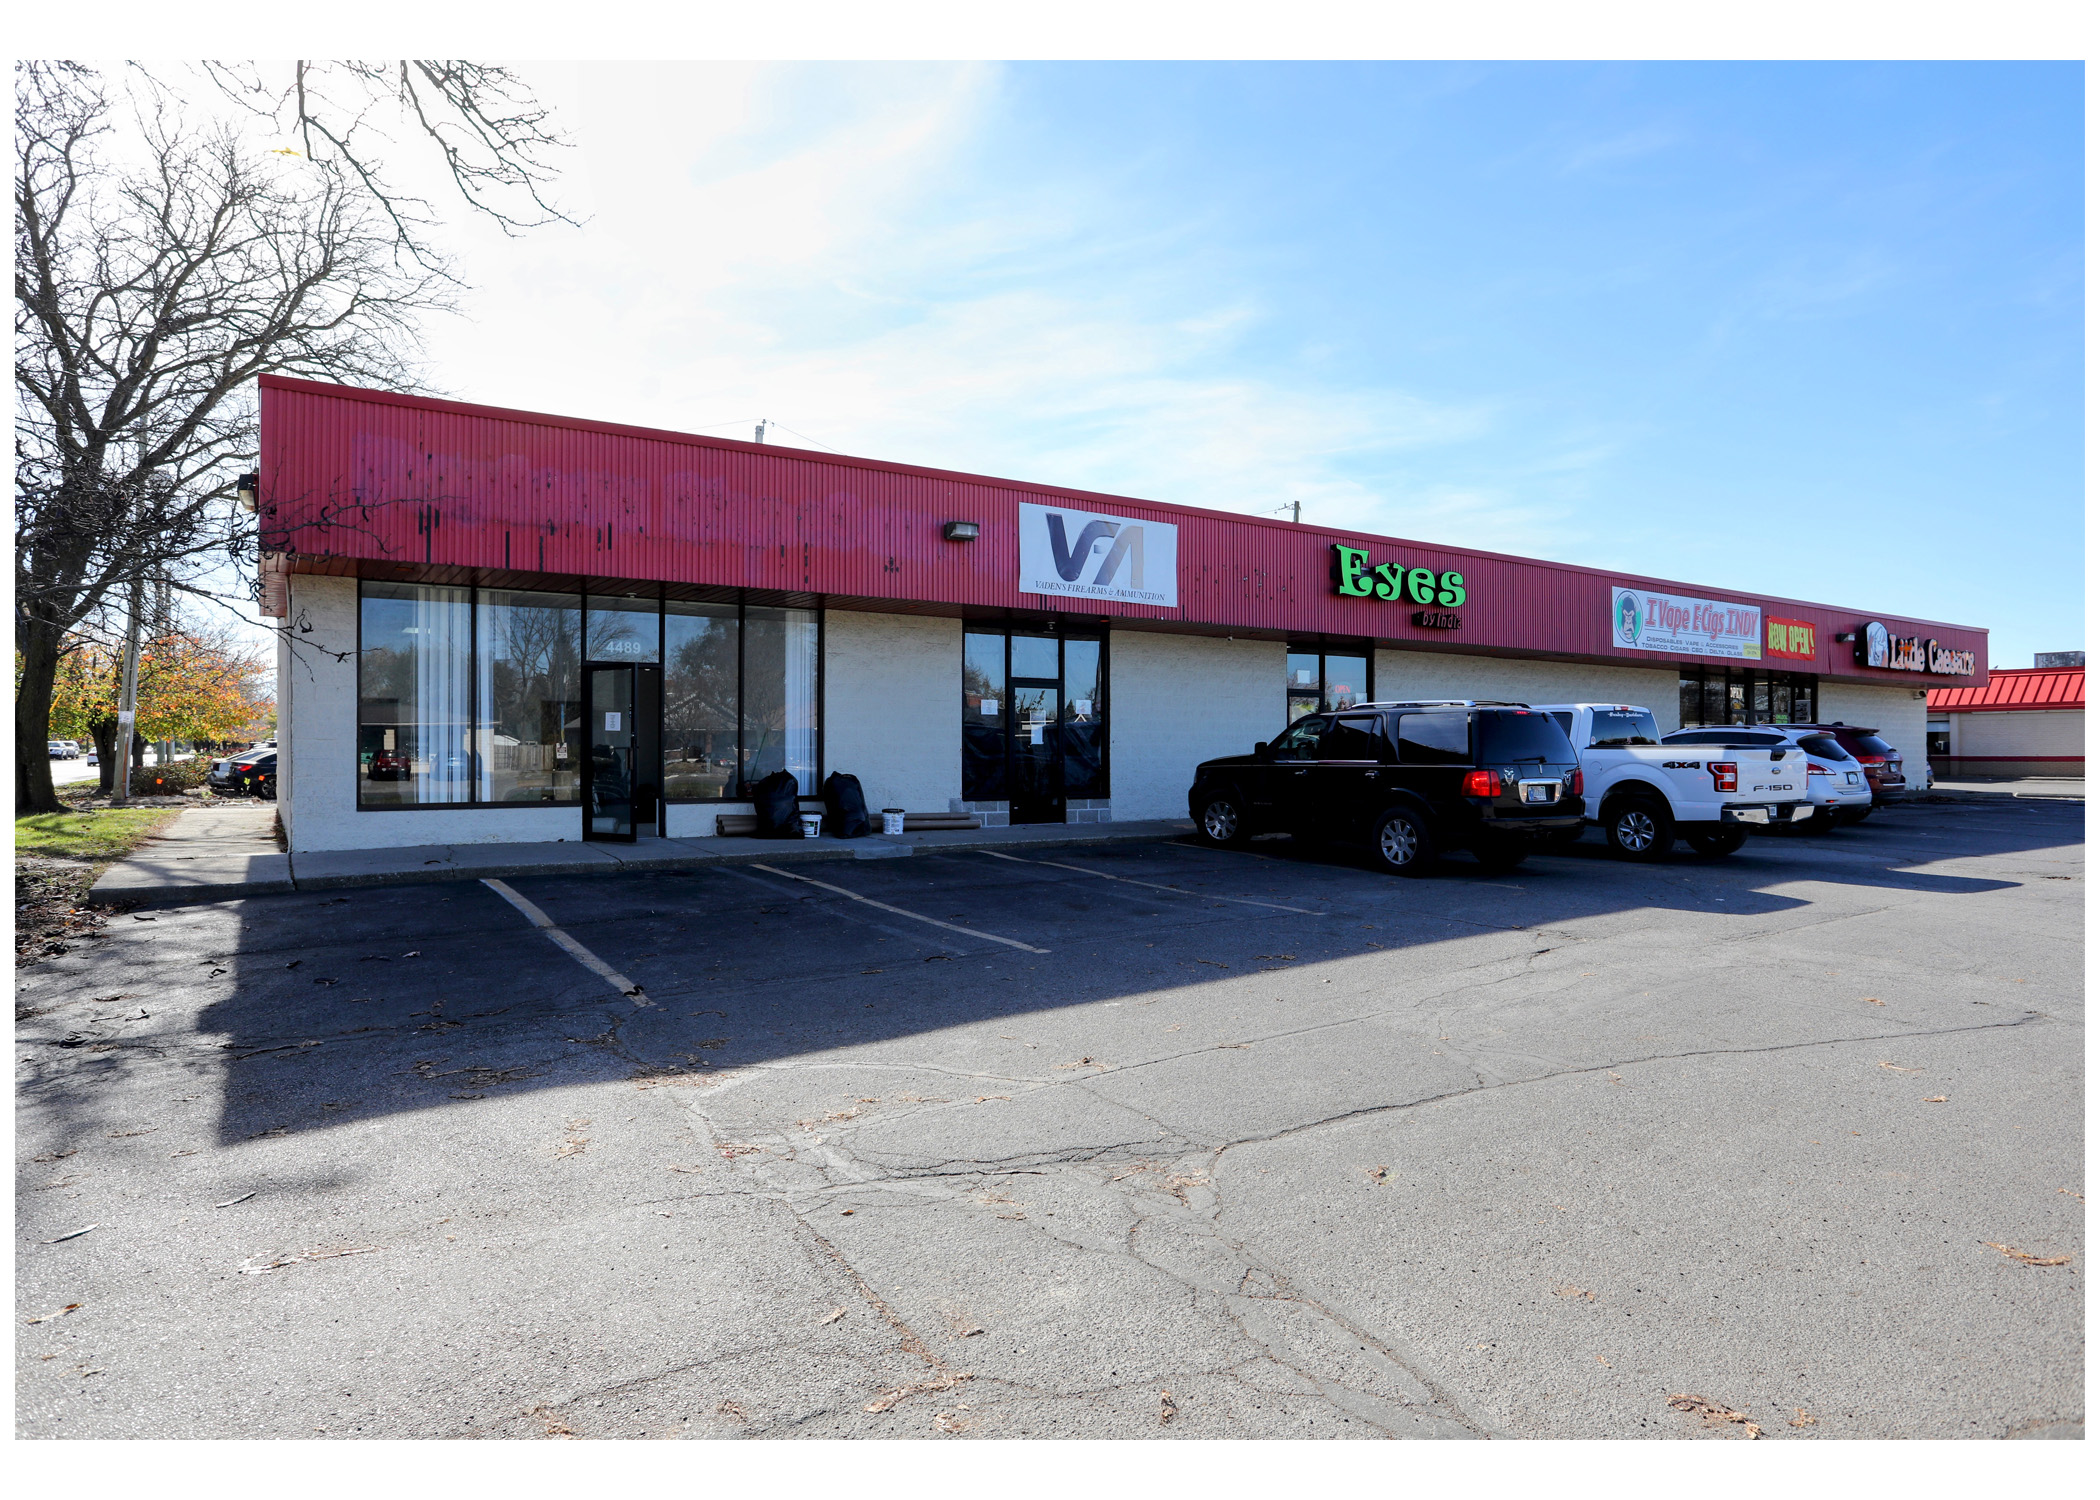 Linwood Square, Vaden's Firearms & Ammunition, Eyes by India, IVape ECigs Indy, and Little Caesars